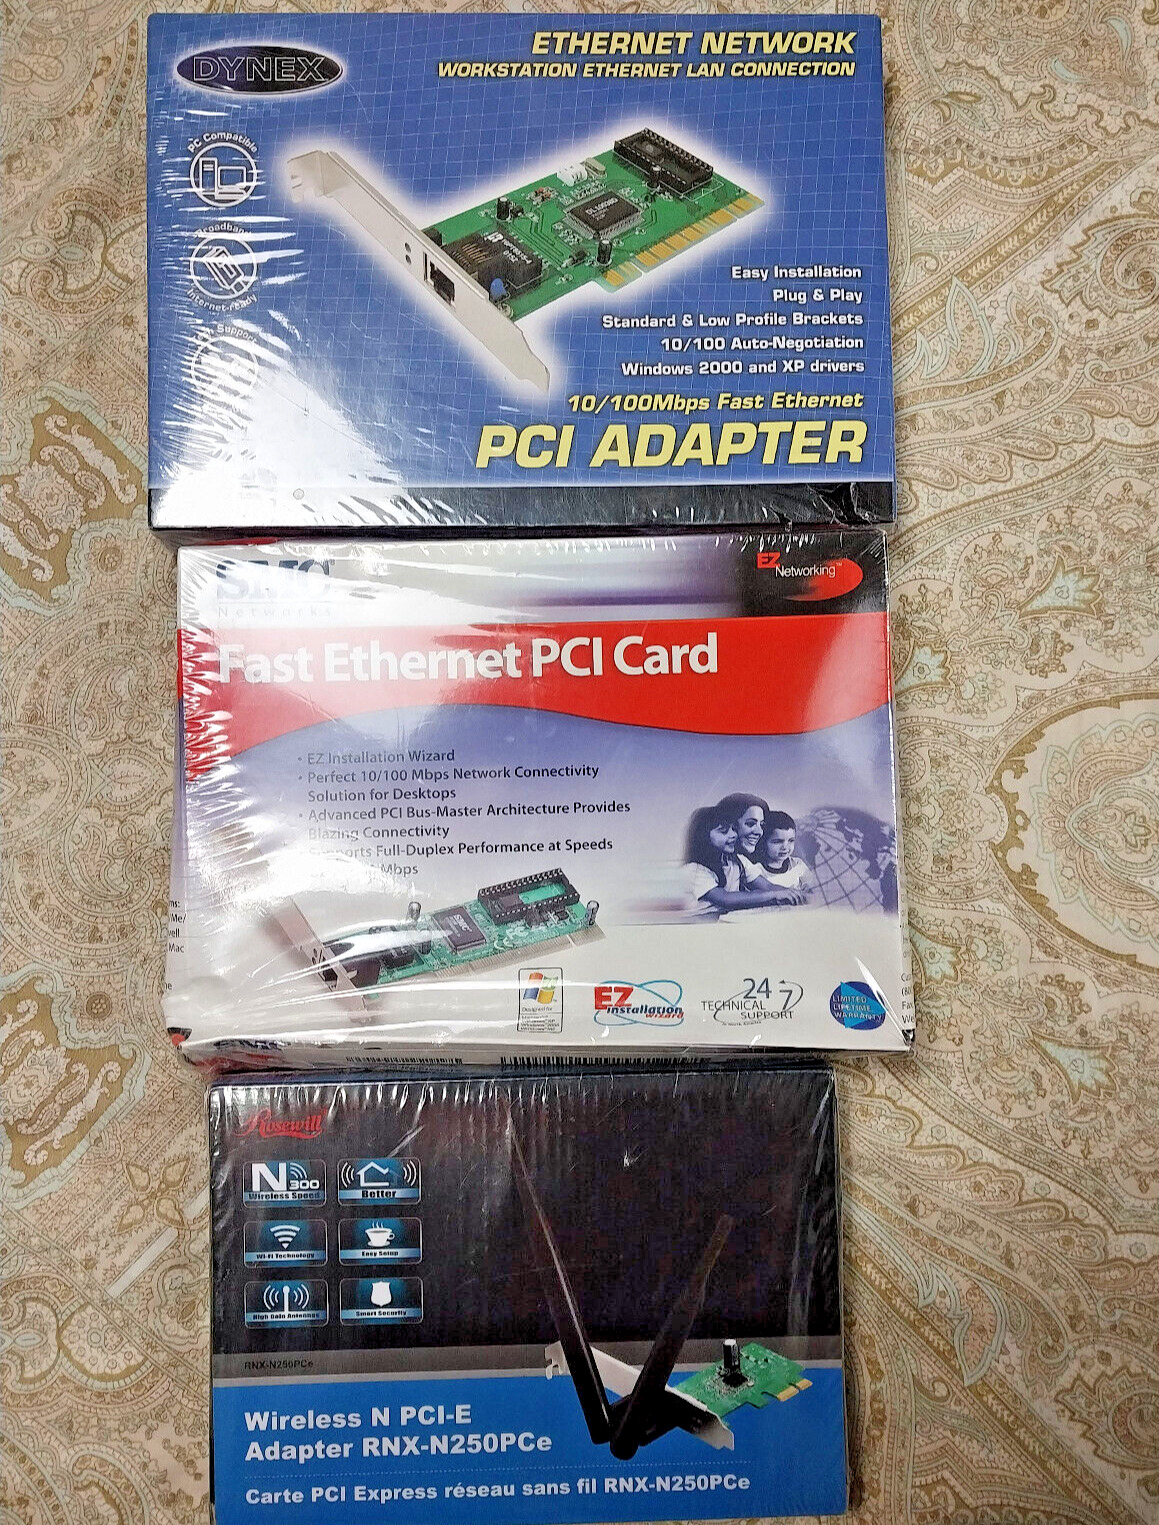 Lot 3 Vintage New Sealed Computer PC PCI Adapters Cards Ethernet, Wireless